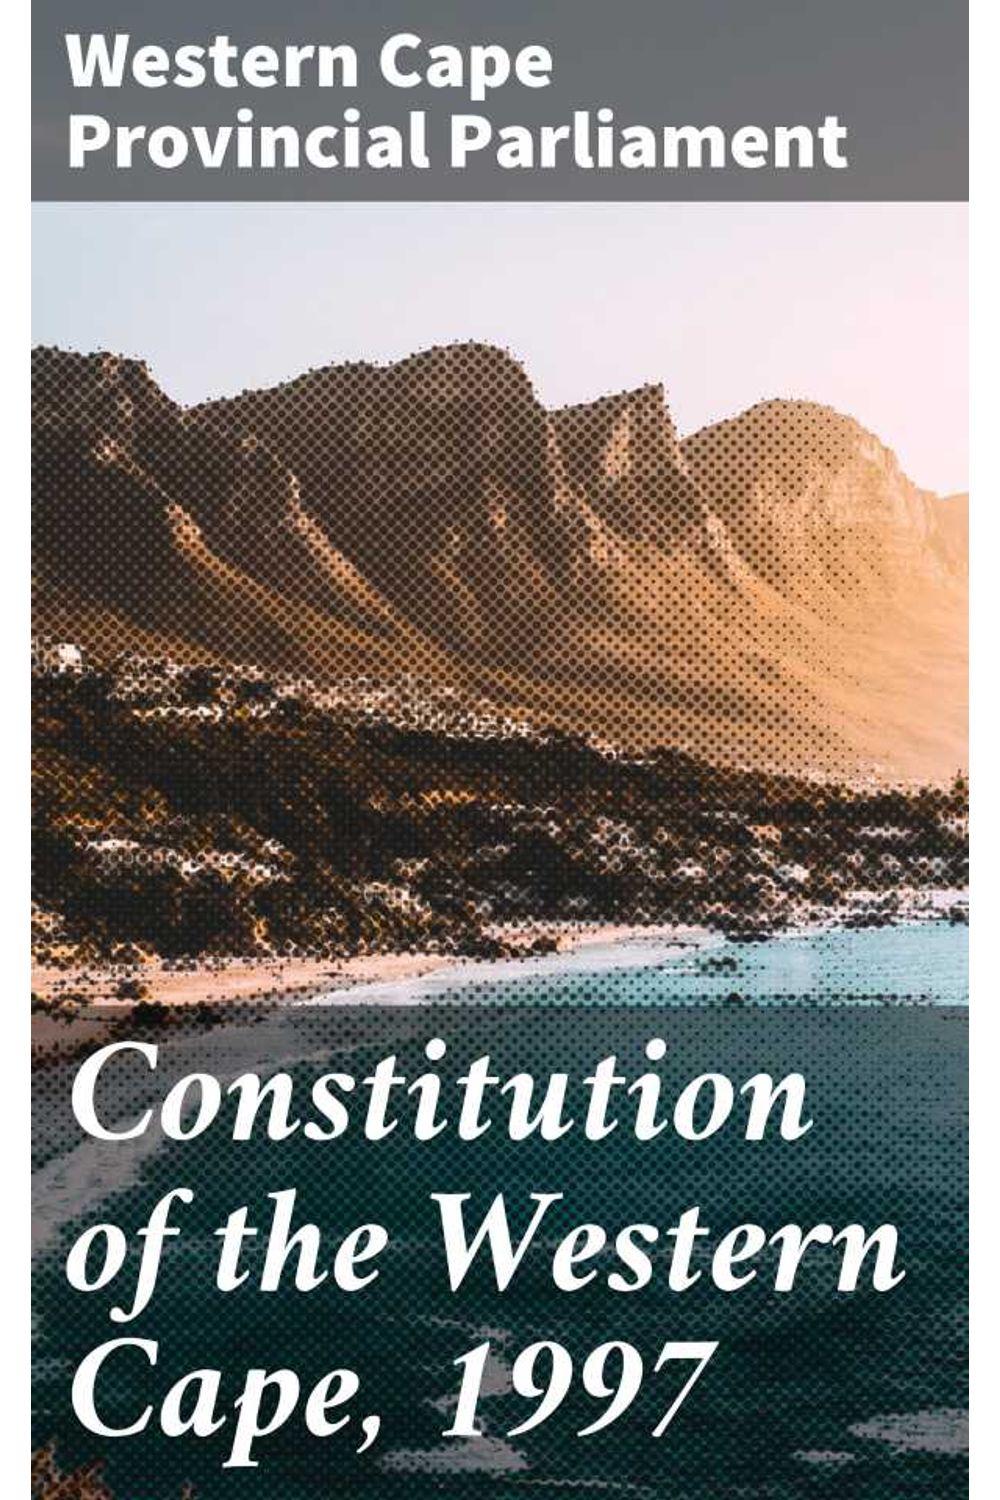 bw-constitution-of-the-western-cape-1997-good-press-4064066314620